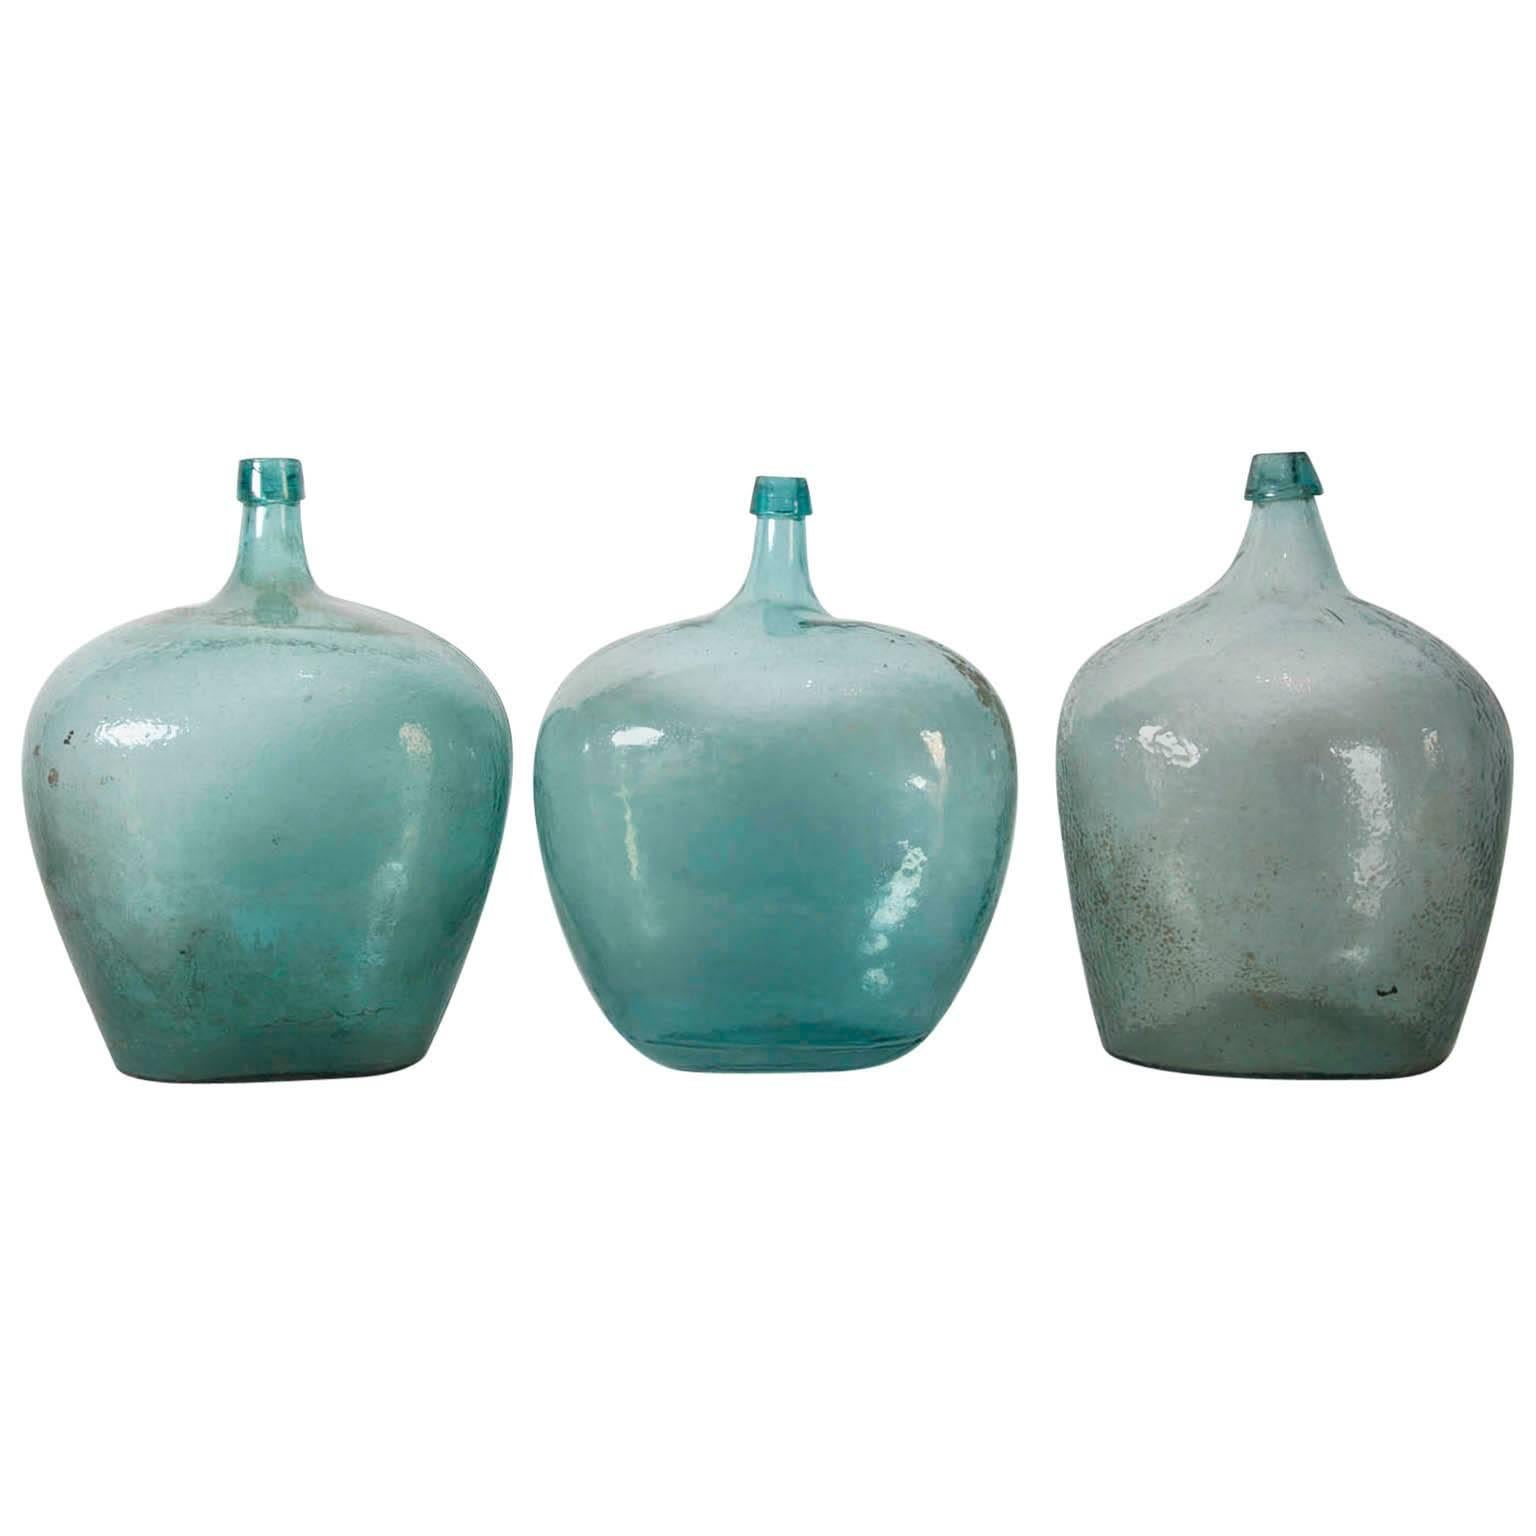 20th Century Set of Three Green Handblow Bottles or Demijohns from Oaxaca Mexico For Sale